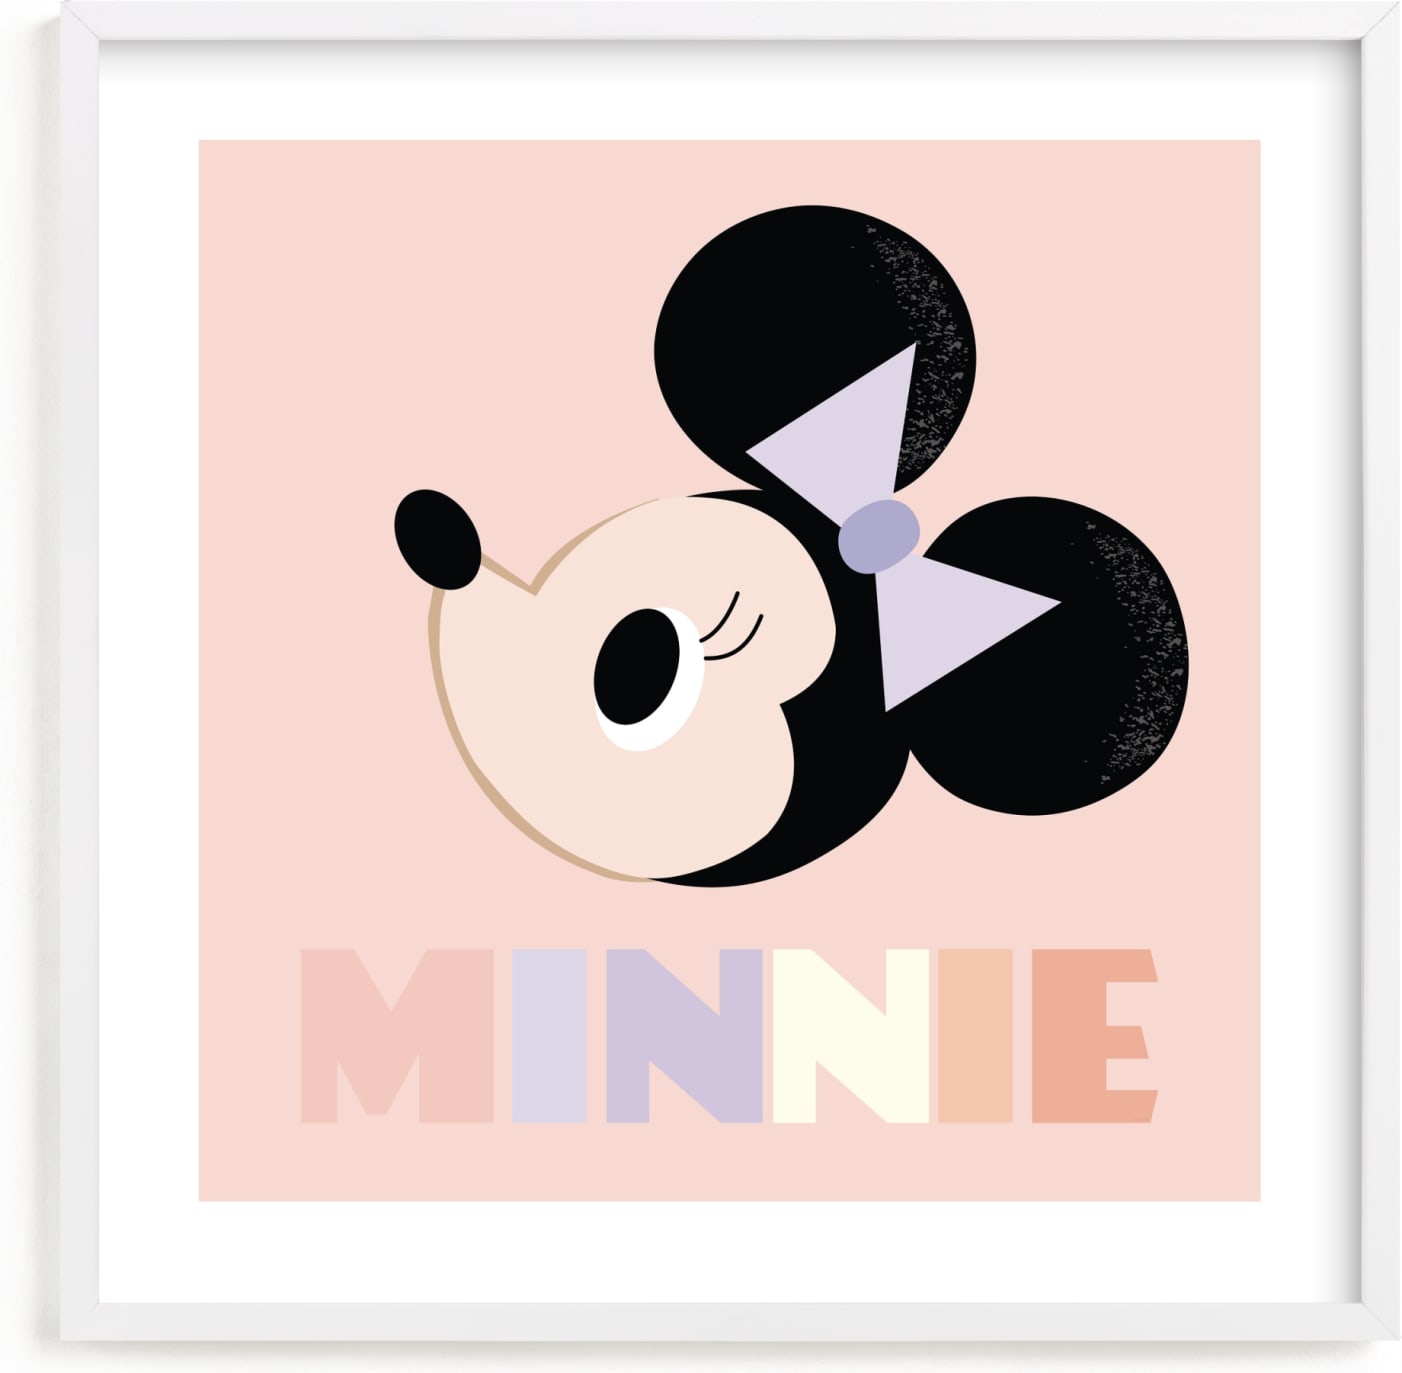 This is a purple, pink, black disney art by Angela Thompson called Disney's Minnie Mouse.